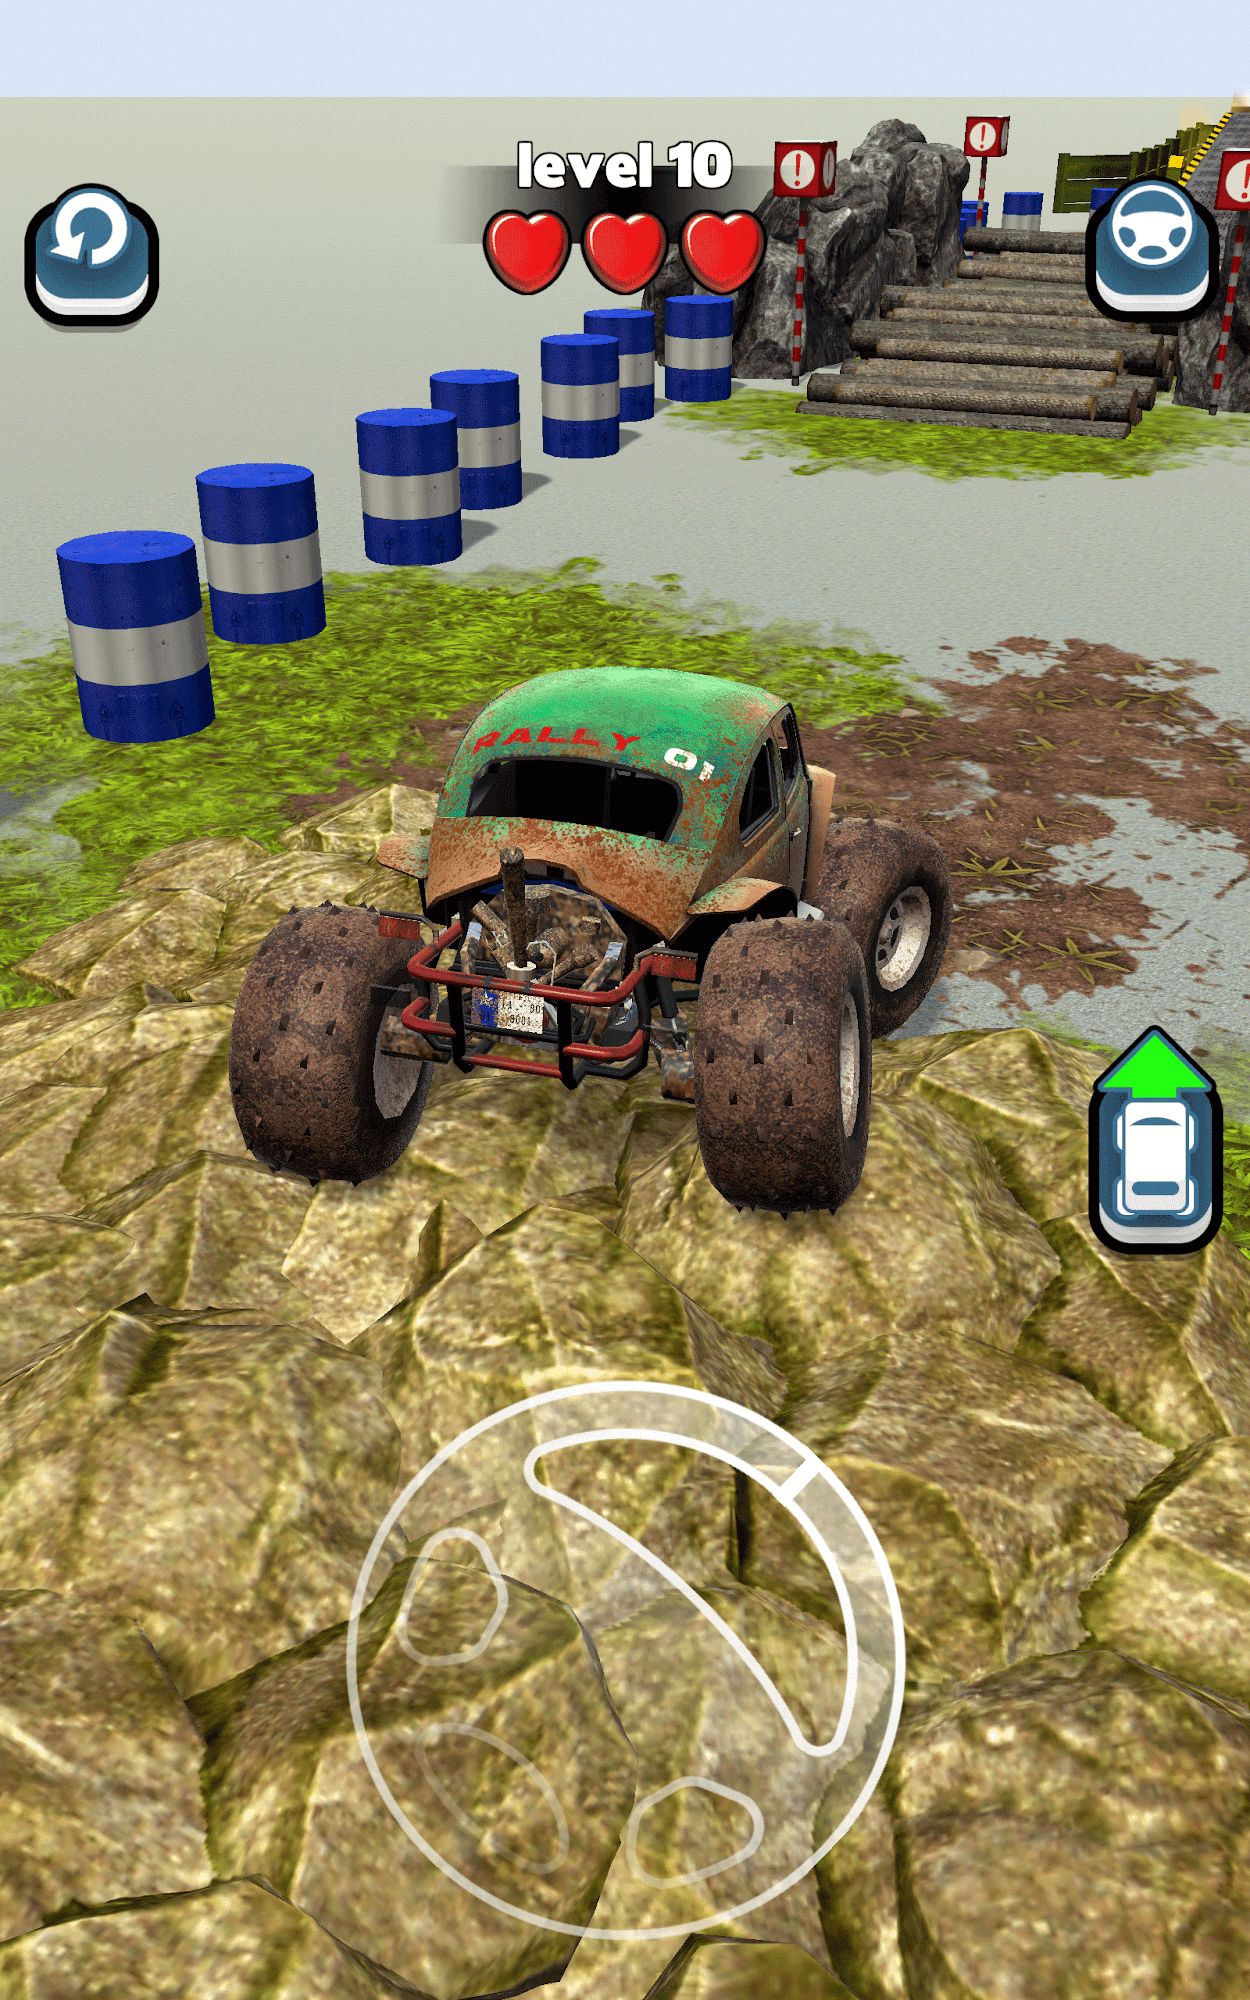 Hyper 4x4 Driving - Android game screenshots.